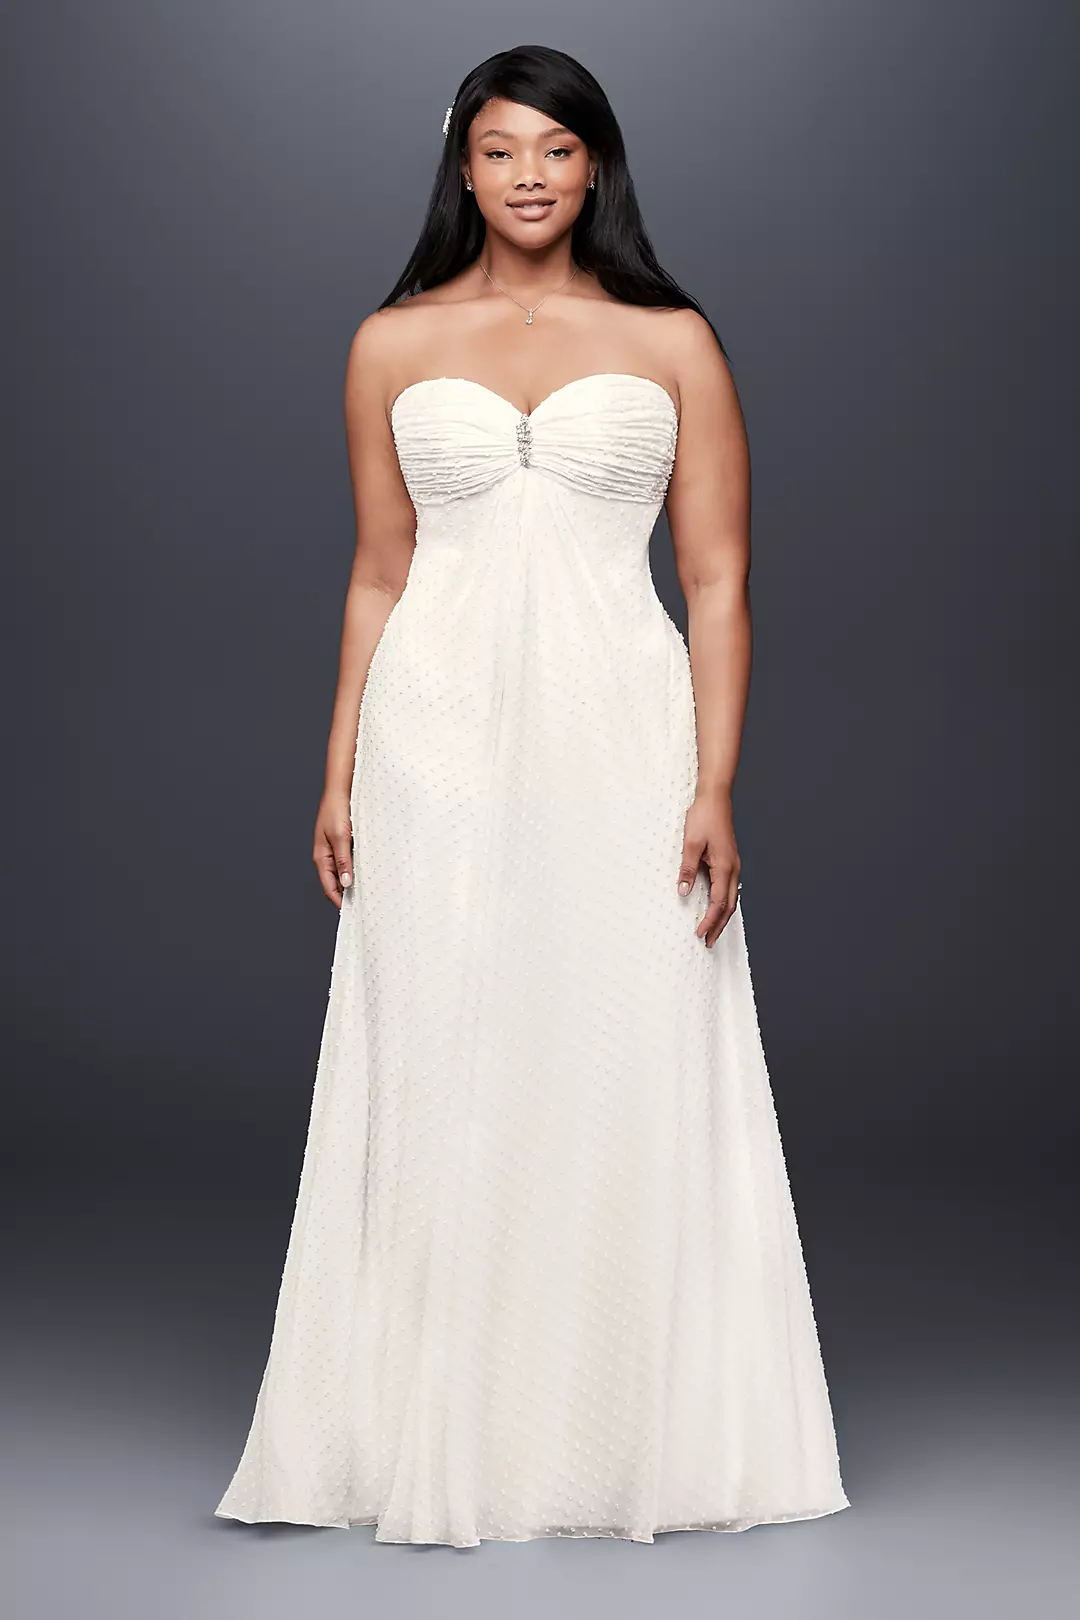 Dotted Plus Size Wedding Dress with Brooch  Image